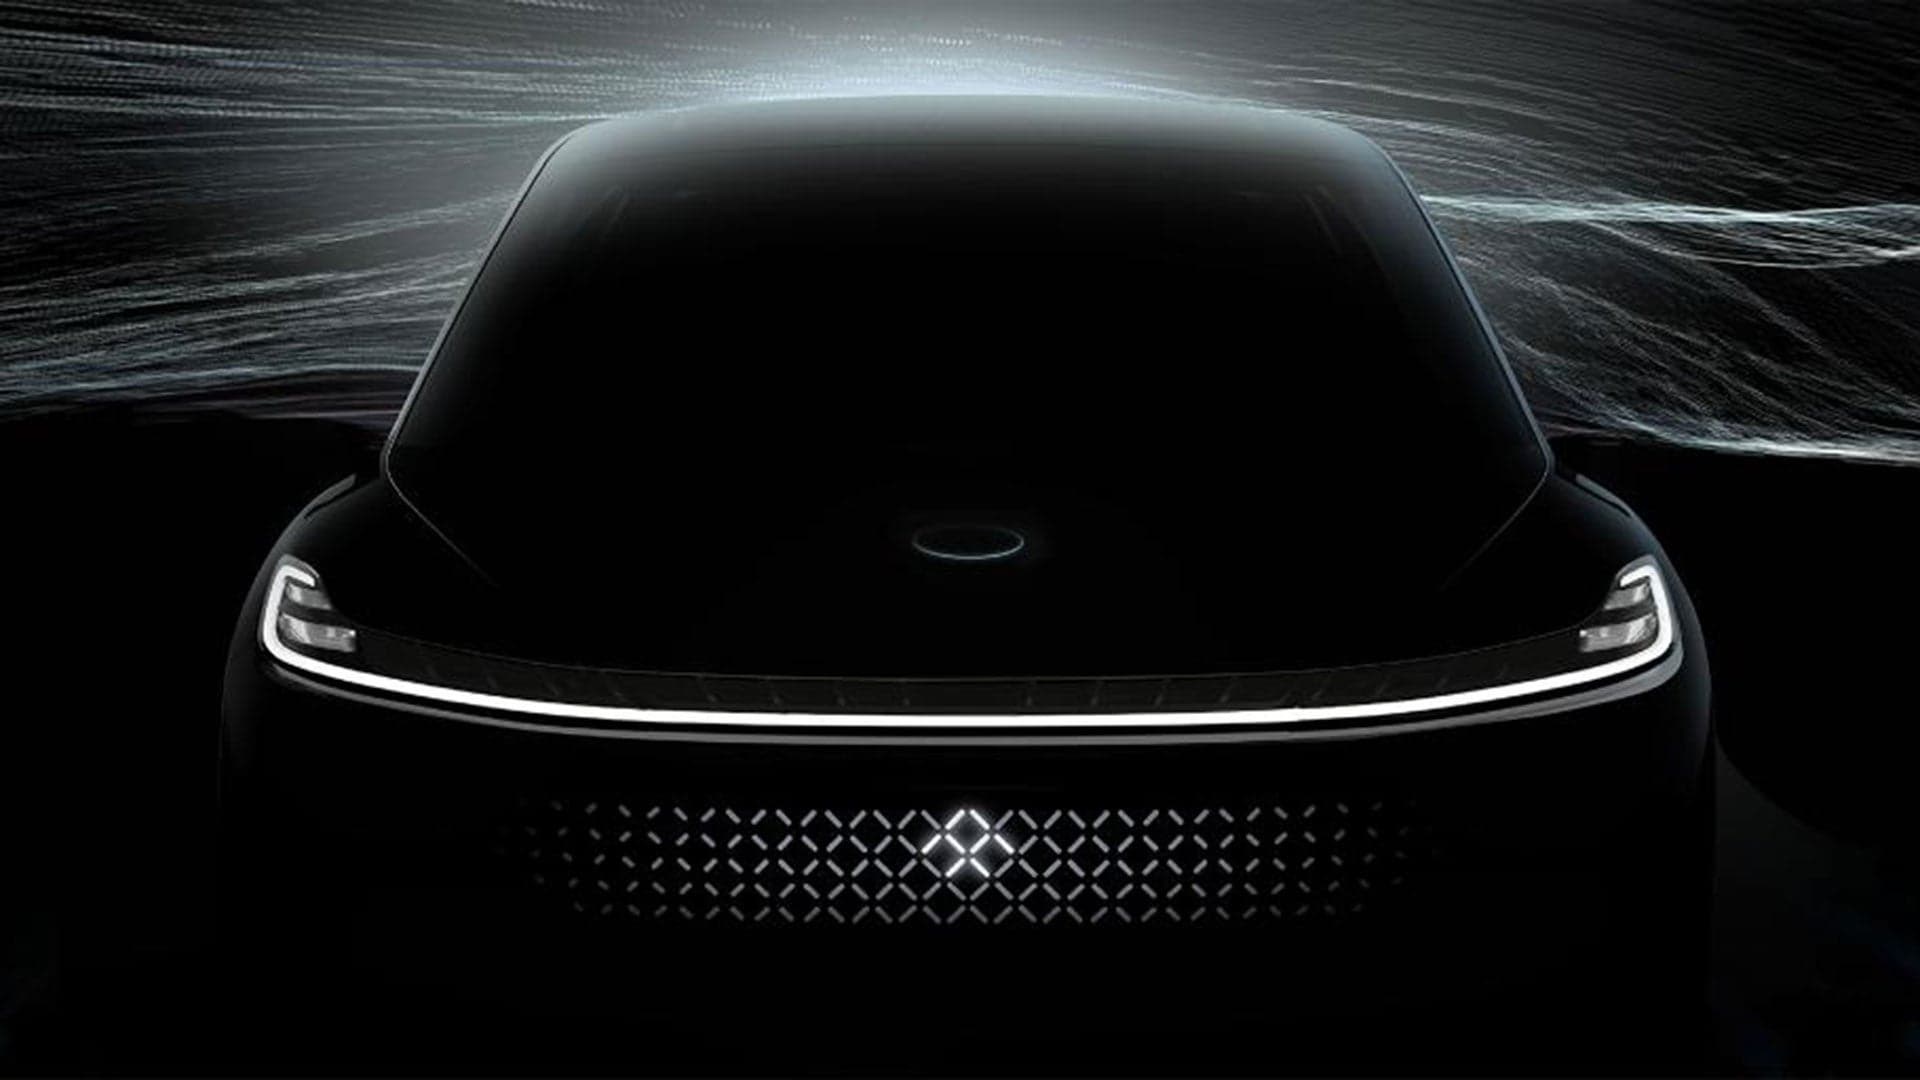 Here’s Our Best Look Yet at Faraday Future ‘s Upcoming SUV